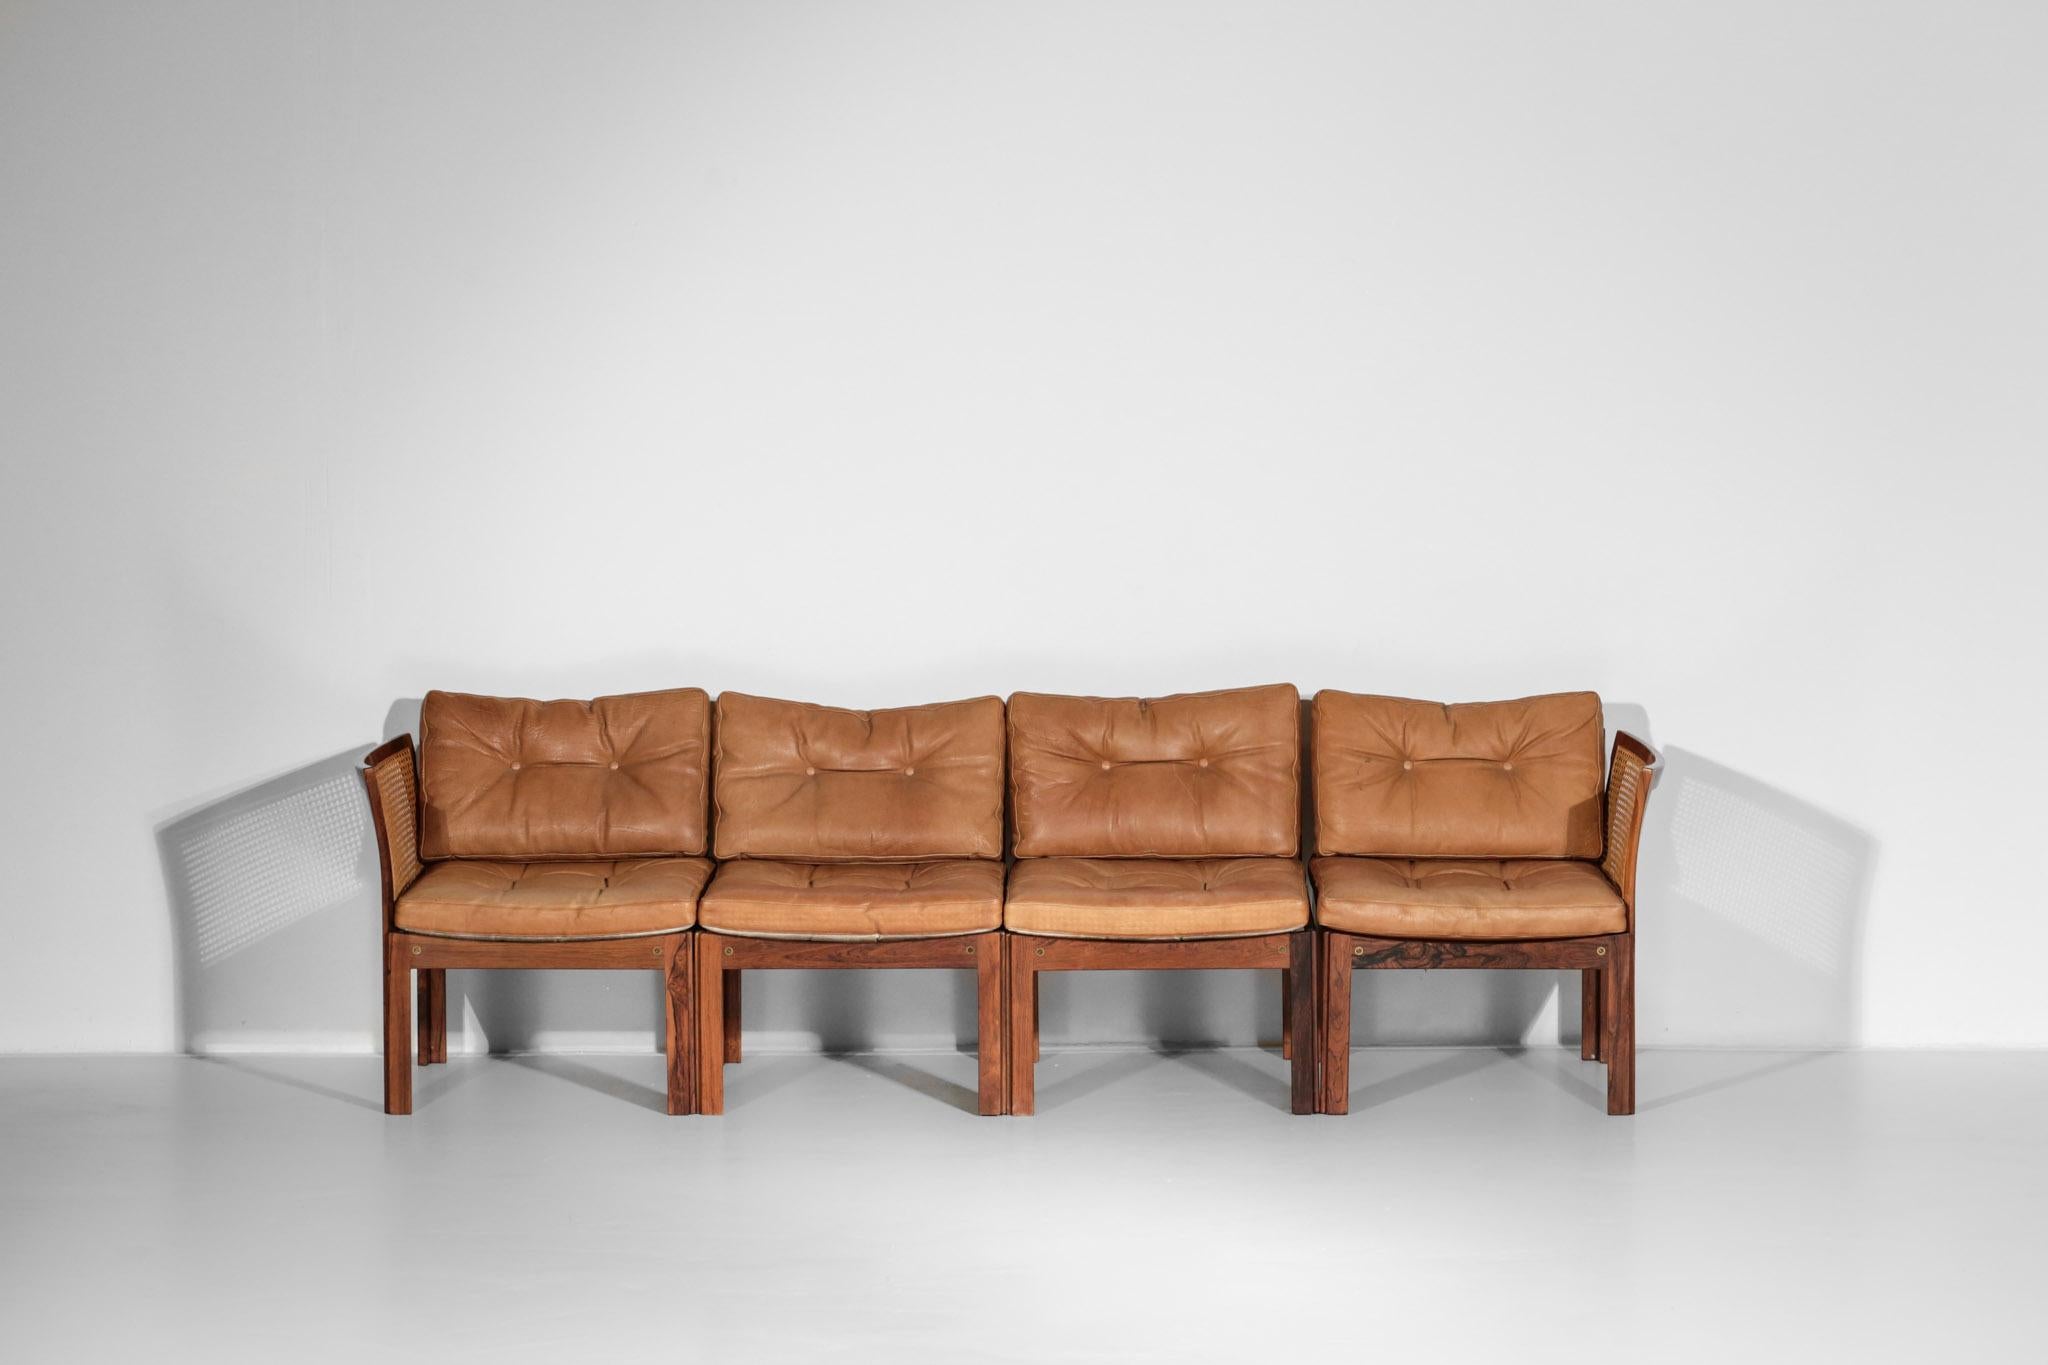 Illum Wikkelso Leather Sofa in Rosewood and Woven Rattan Cane For Sale 7